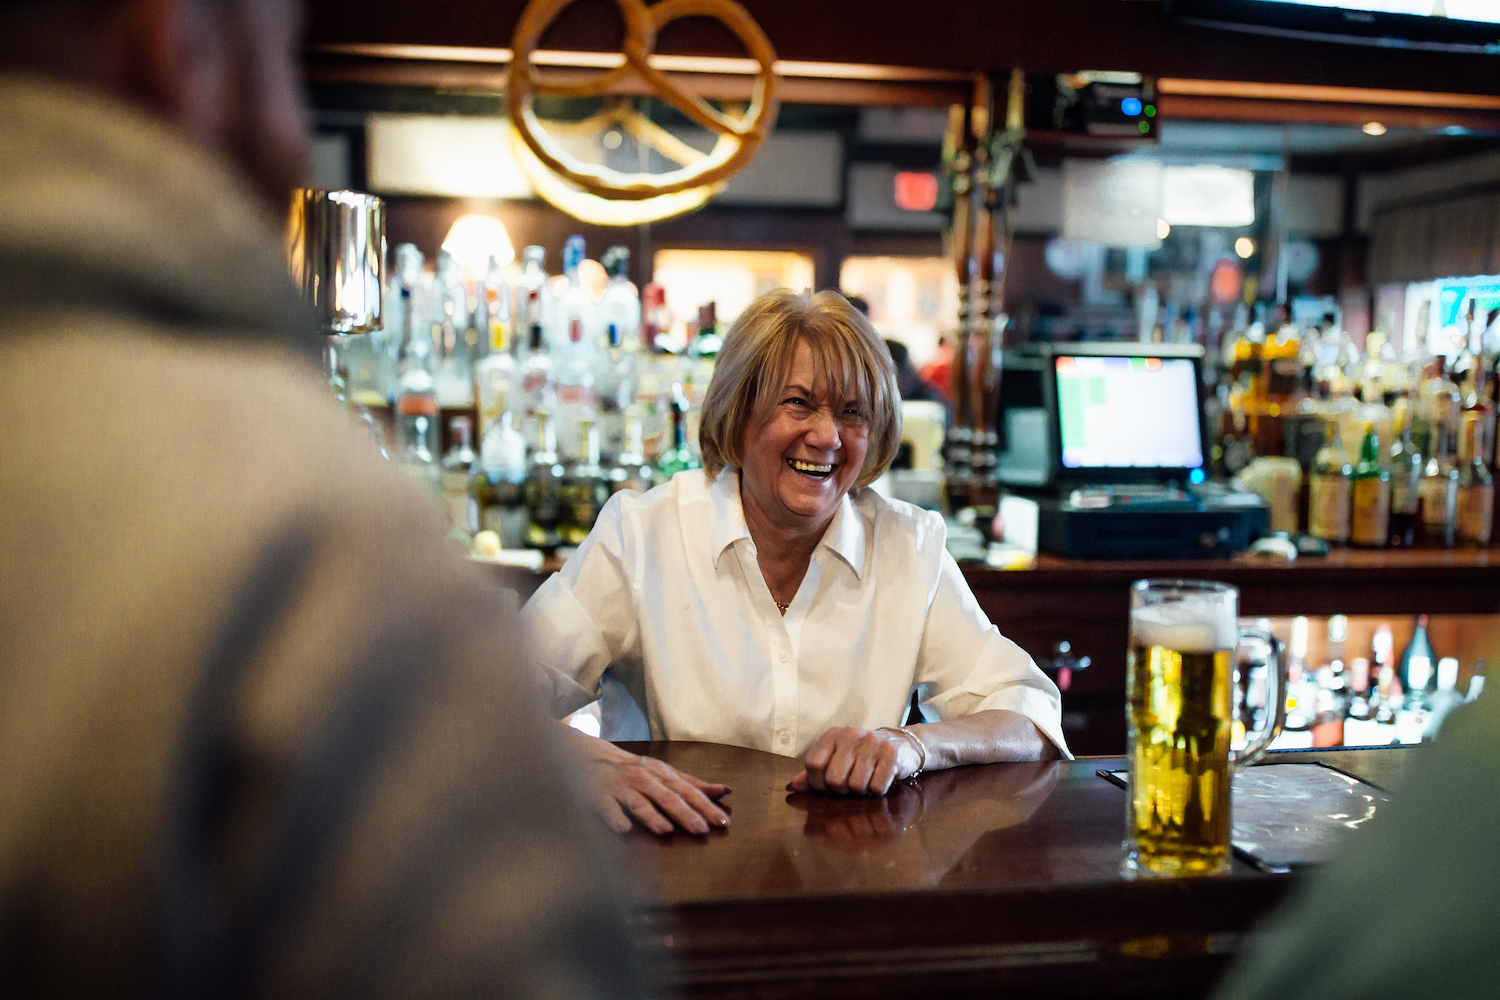 For this Women’s issue, we sidled up to the bar to talk with four women who happen to be some of the borough’s most beloved longtime bartenders.